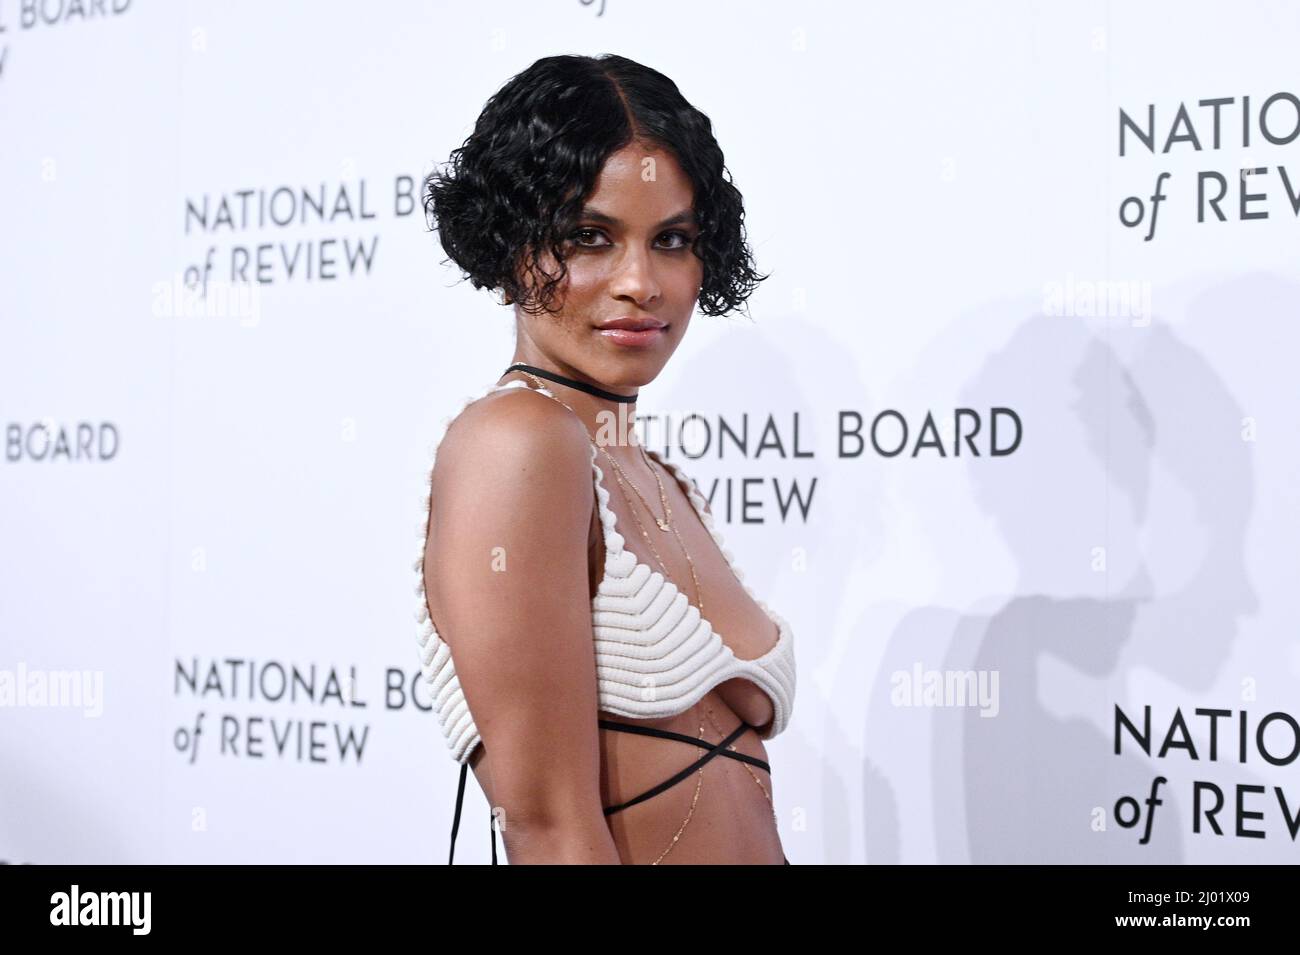 https://c8.alamy.com/comp/2J01X09/german-us-actress-zazie-beetz-walking-on-the-red-carpet-during-the-national-board-of-review-annual-awards-held-at-cipriani-42nd-street-in-new-york-ny-on-march-15-2022-photo-by-anthony-beharsipa-usa-2J01X09.jpg